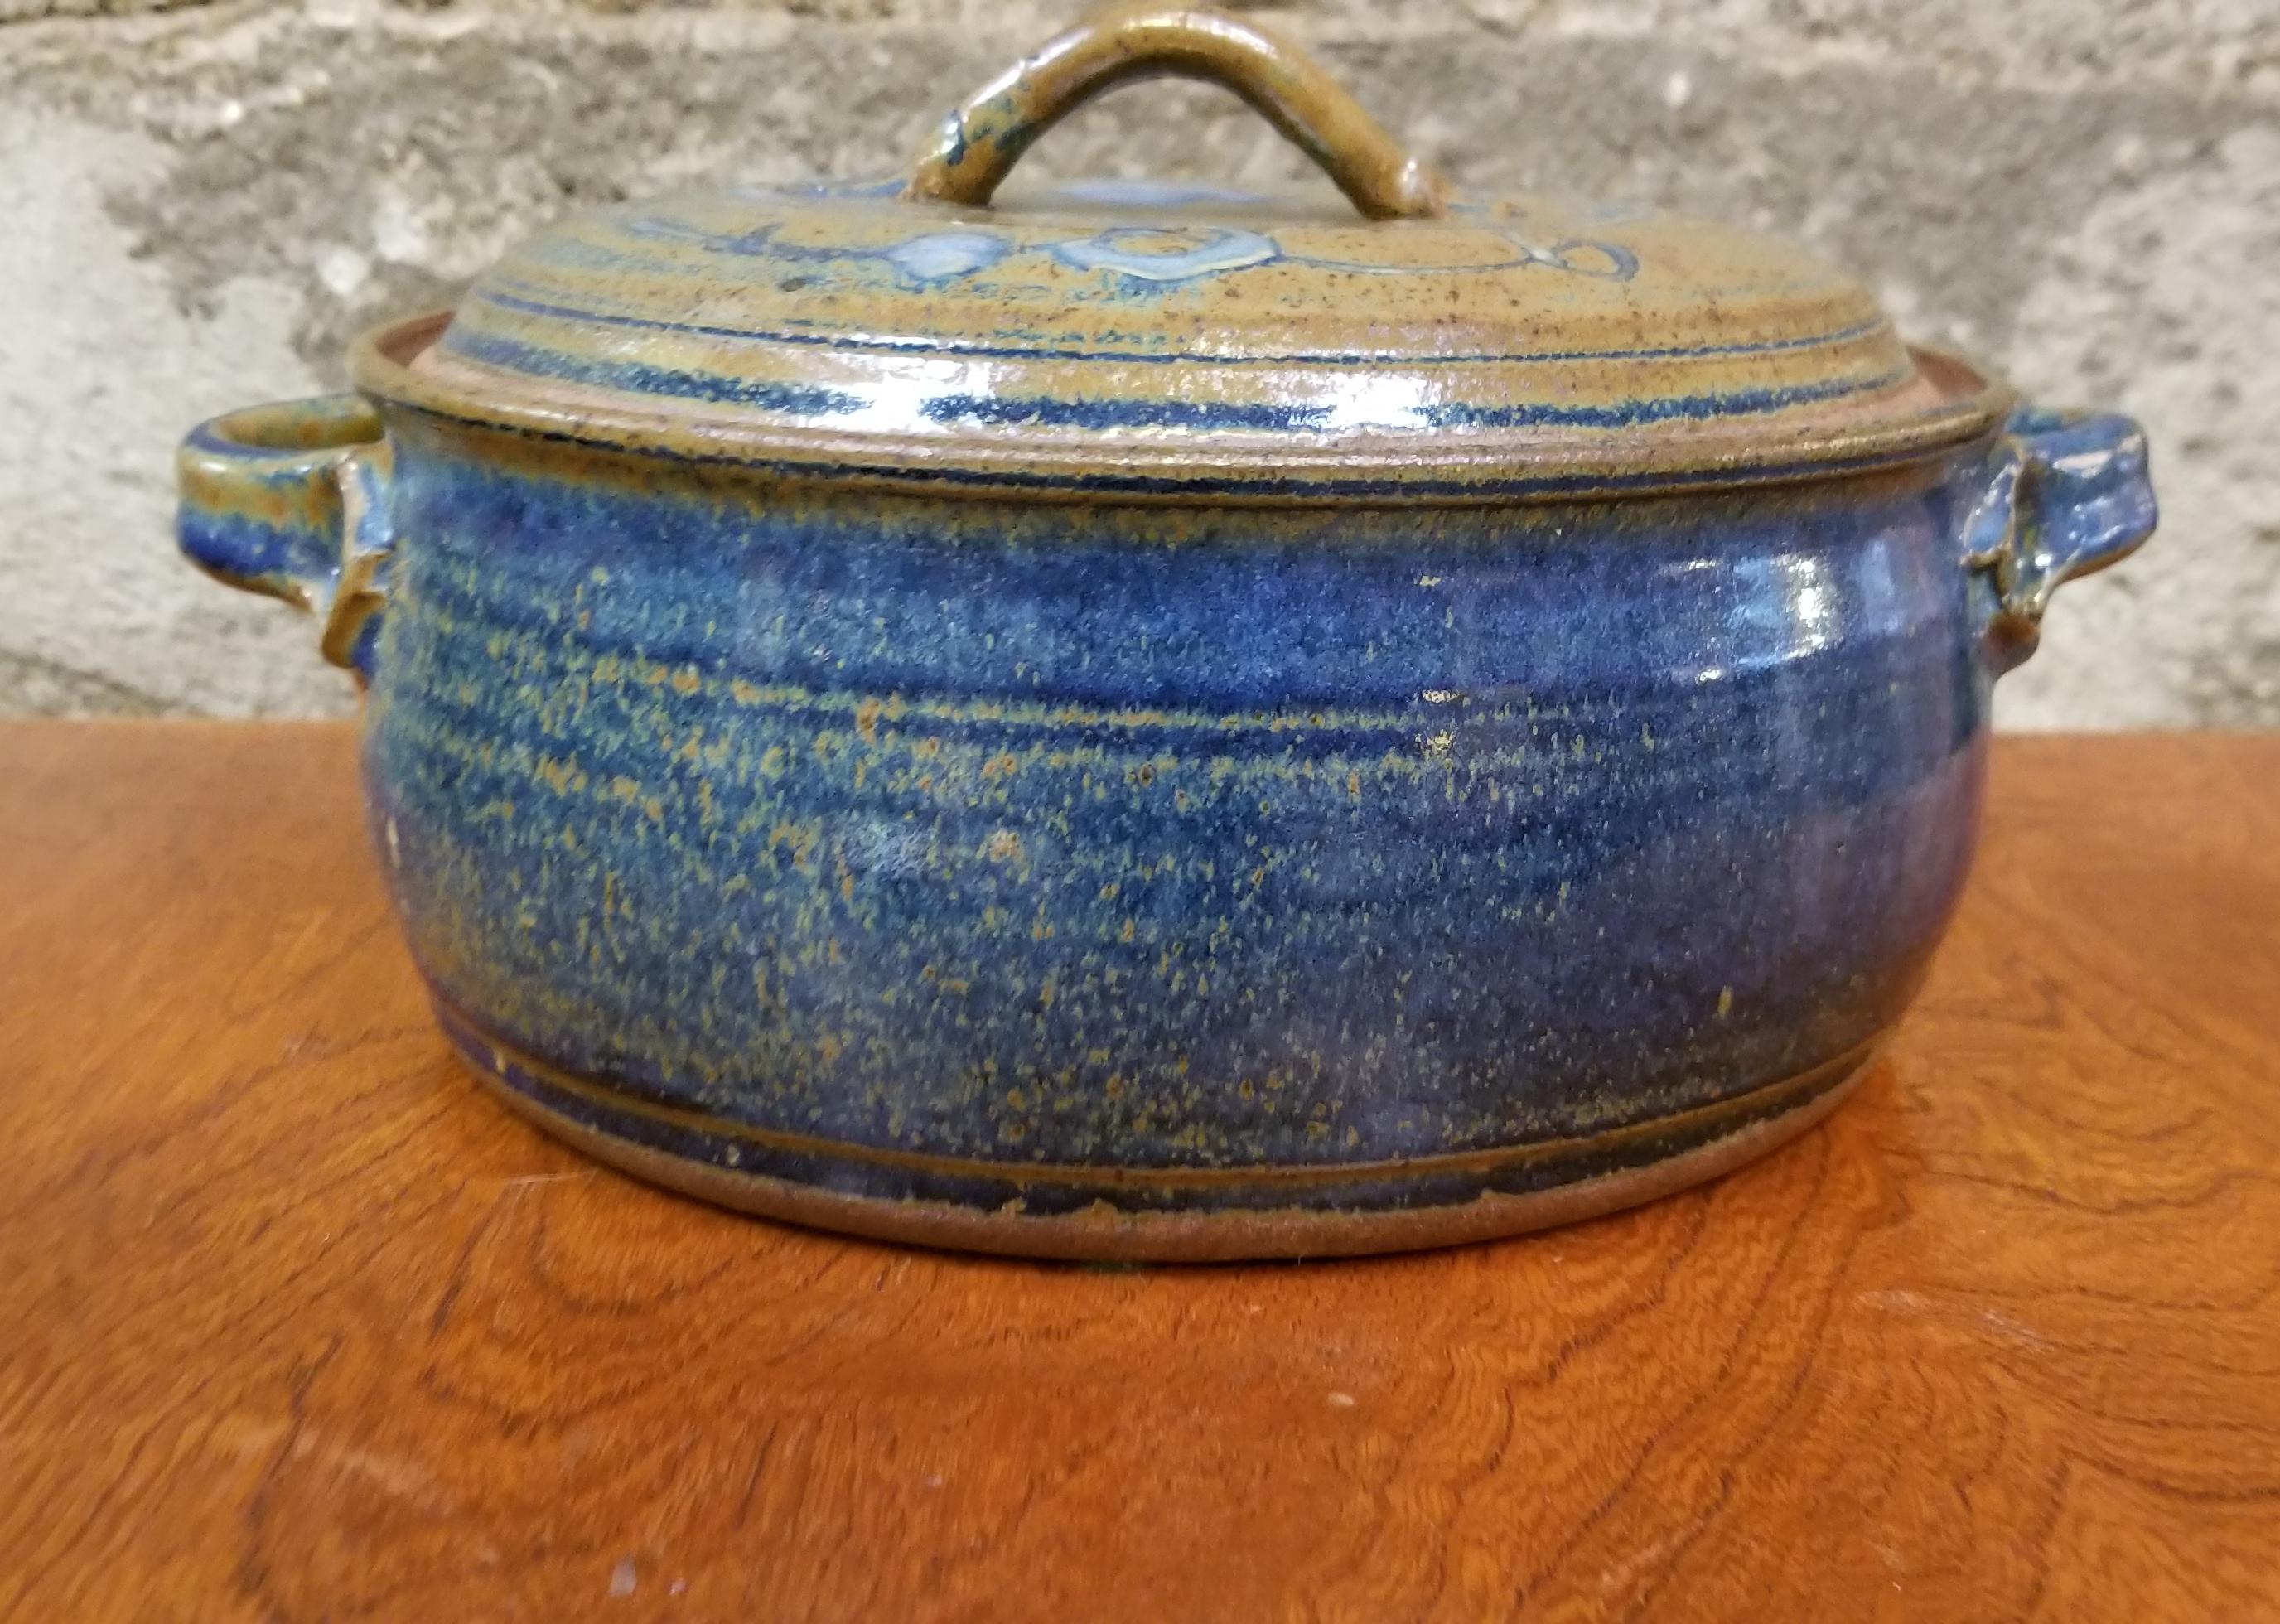 A Mid-Century Modern pottery lidded and handled pot or bowl by San Francisco artist Herman Roderick Volz. Signed on base. Abstract or drizzled textured glaze to lid.

Herman Roderick Volz
Painter, muralist, lithographer, set designer and